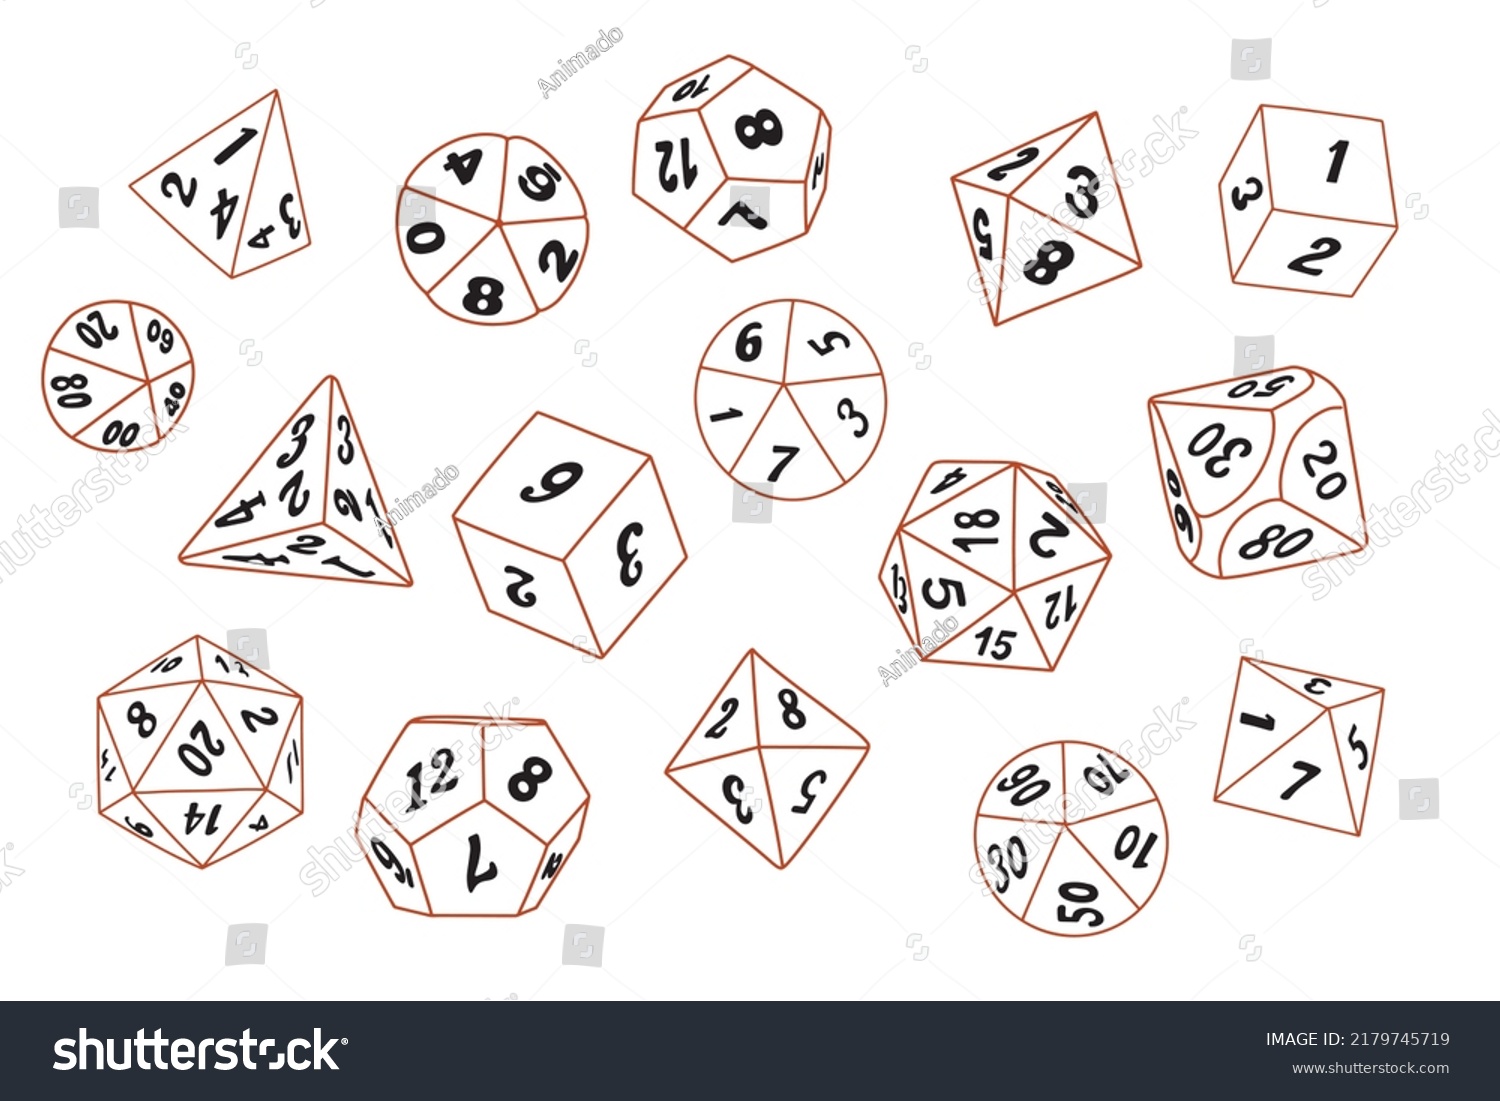 SVG of Vector icon set of dice for boardgames such as DND and RPG in doodle style svg